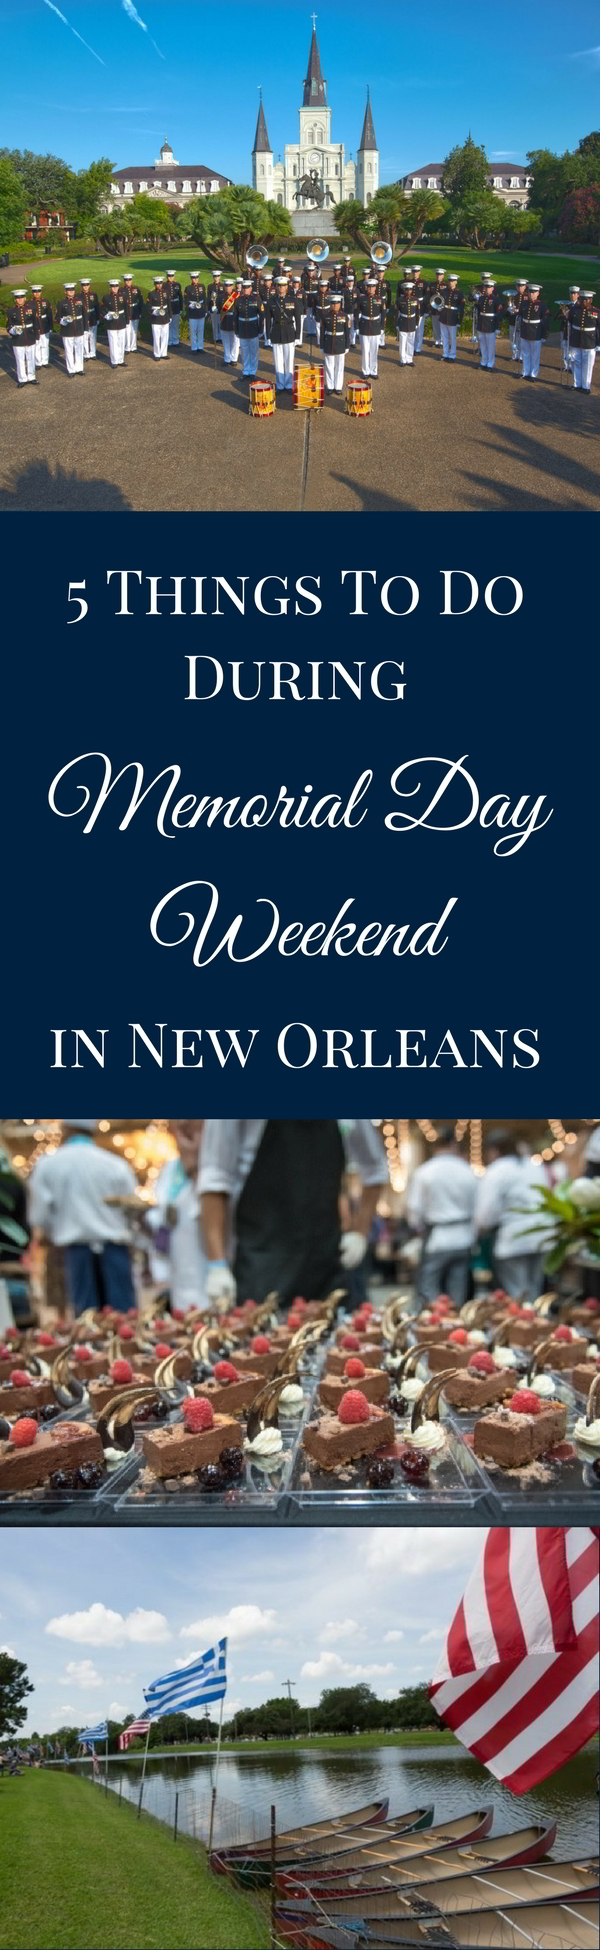 5 Things To Do In New Orleans During Memorial Day Weekend